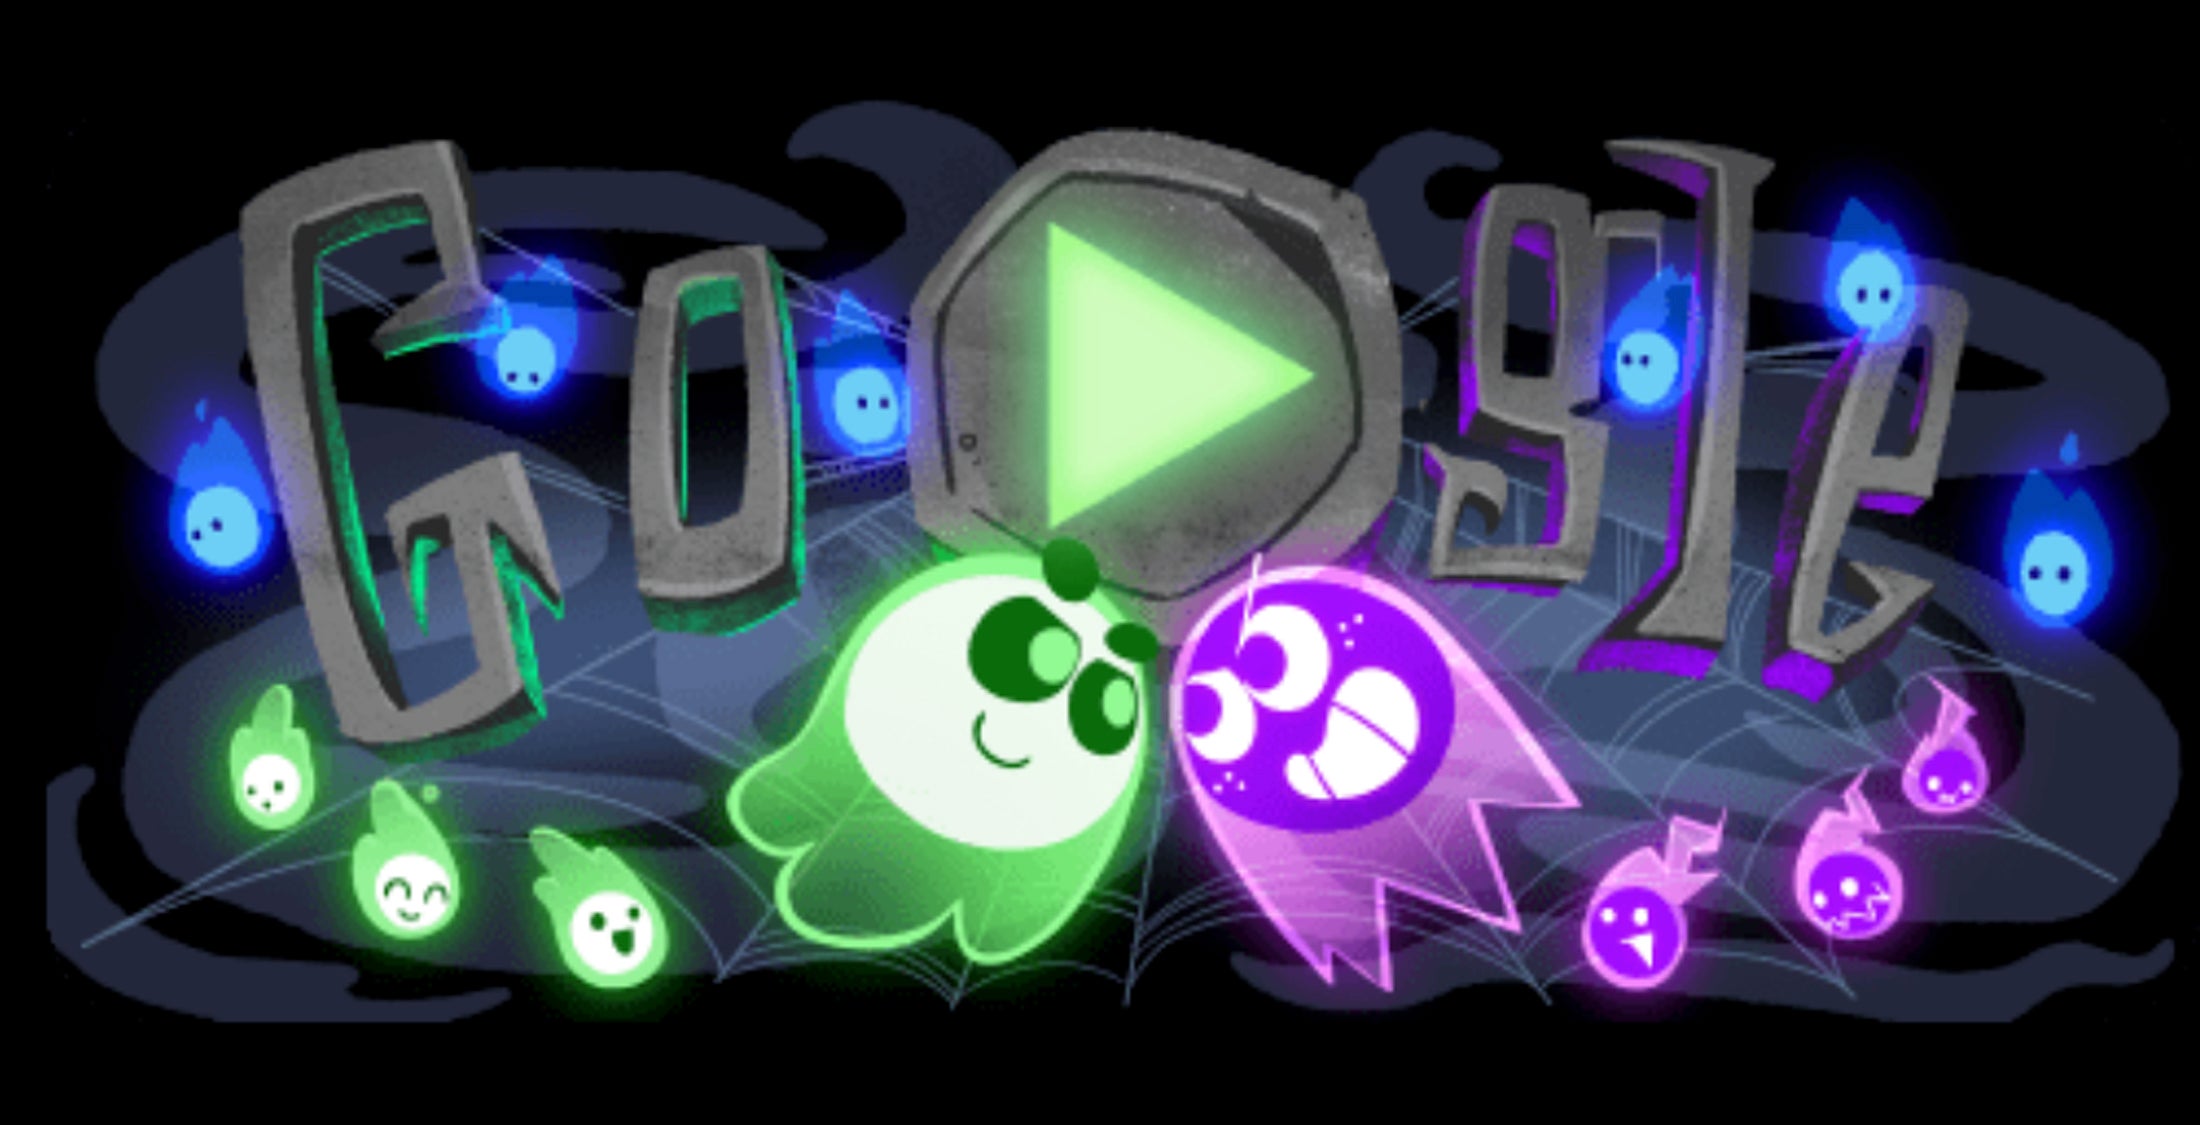 Google's 2018 Halloween Doodle is an addictive multiplayer game here